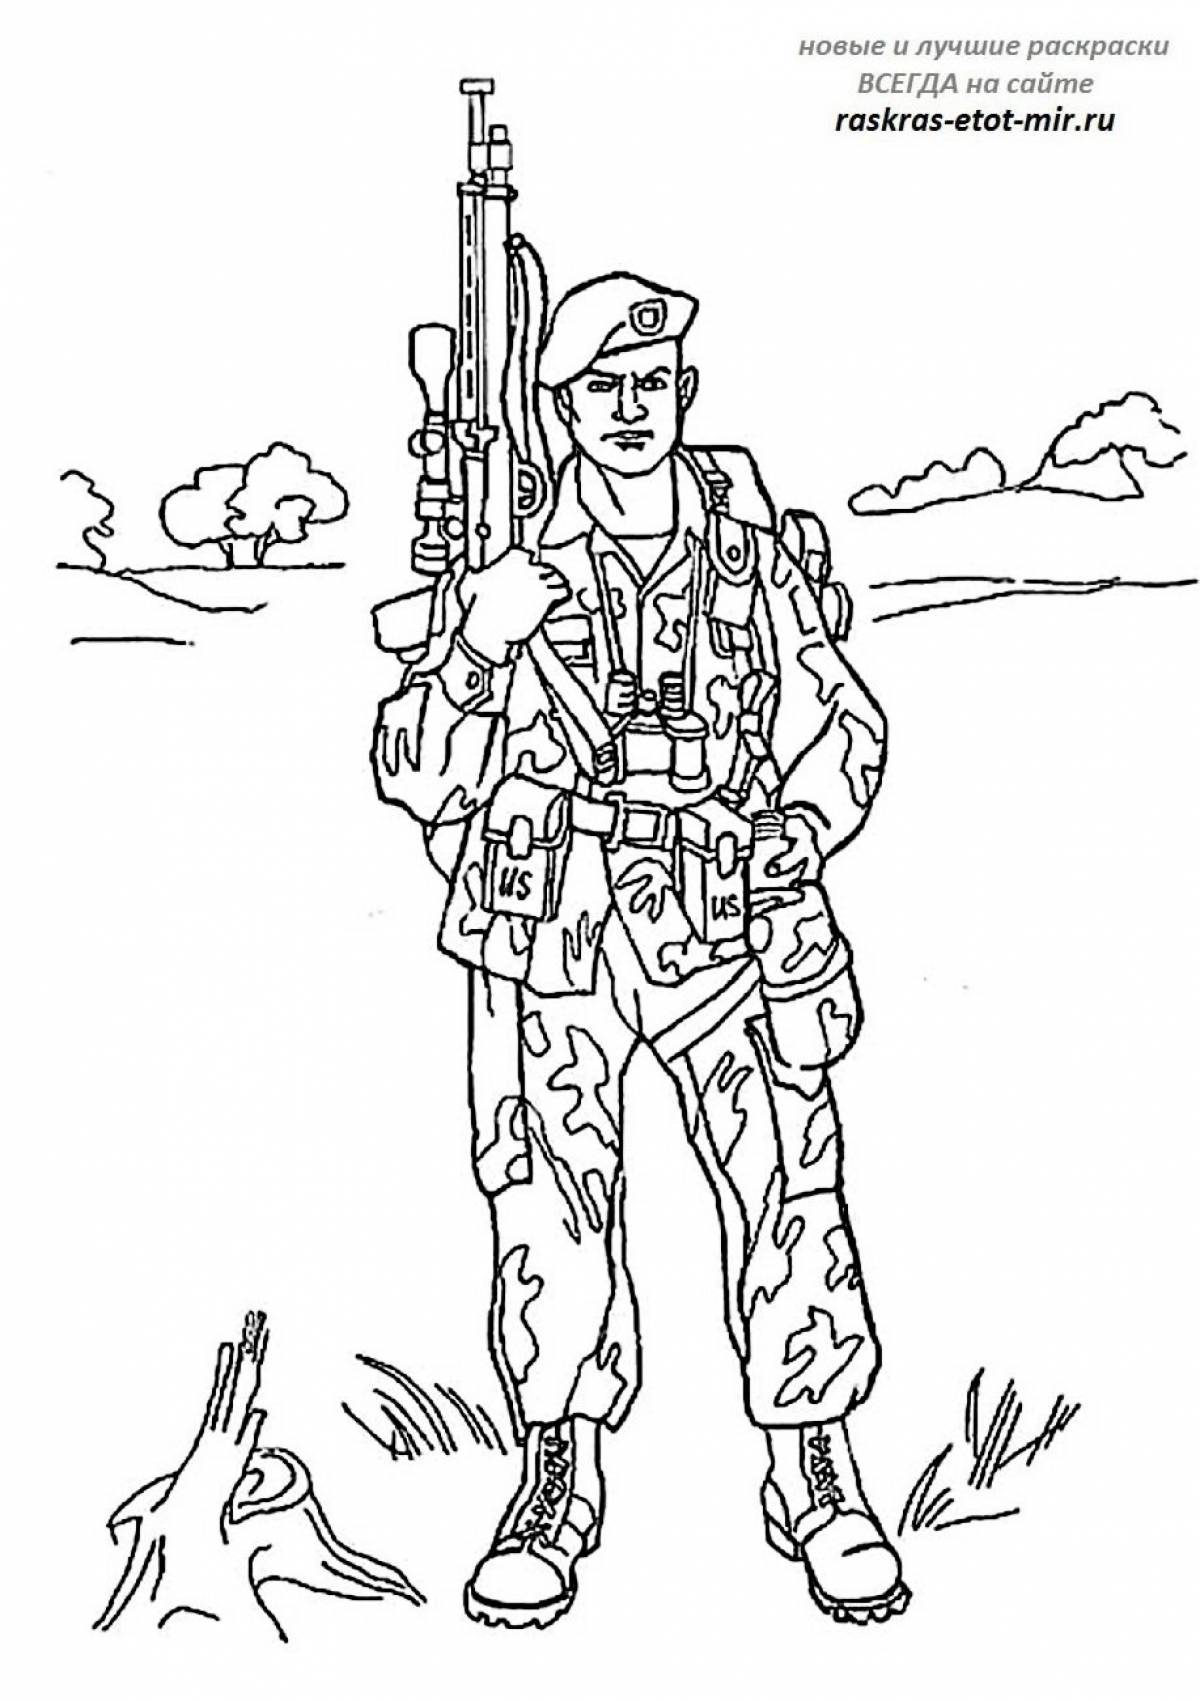 Fairy soldiers coloring pages for children 6-7 years old